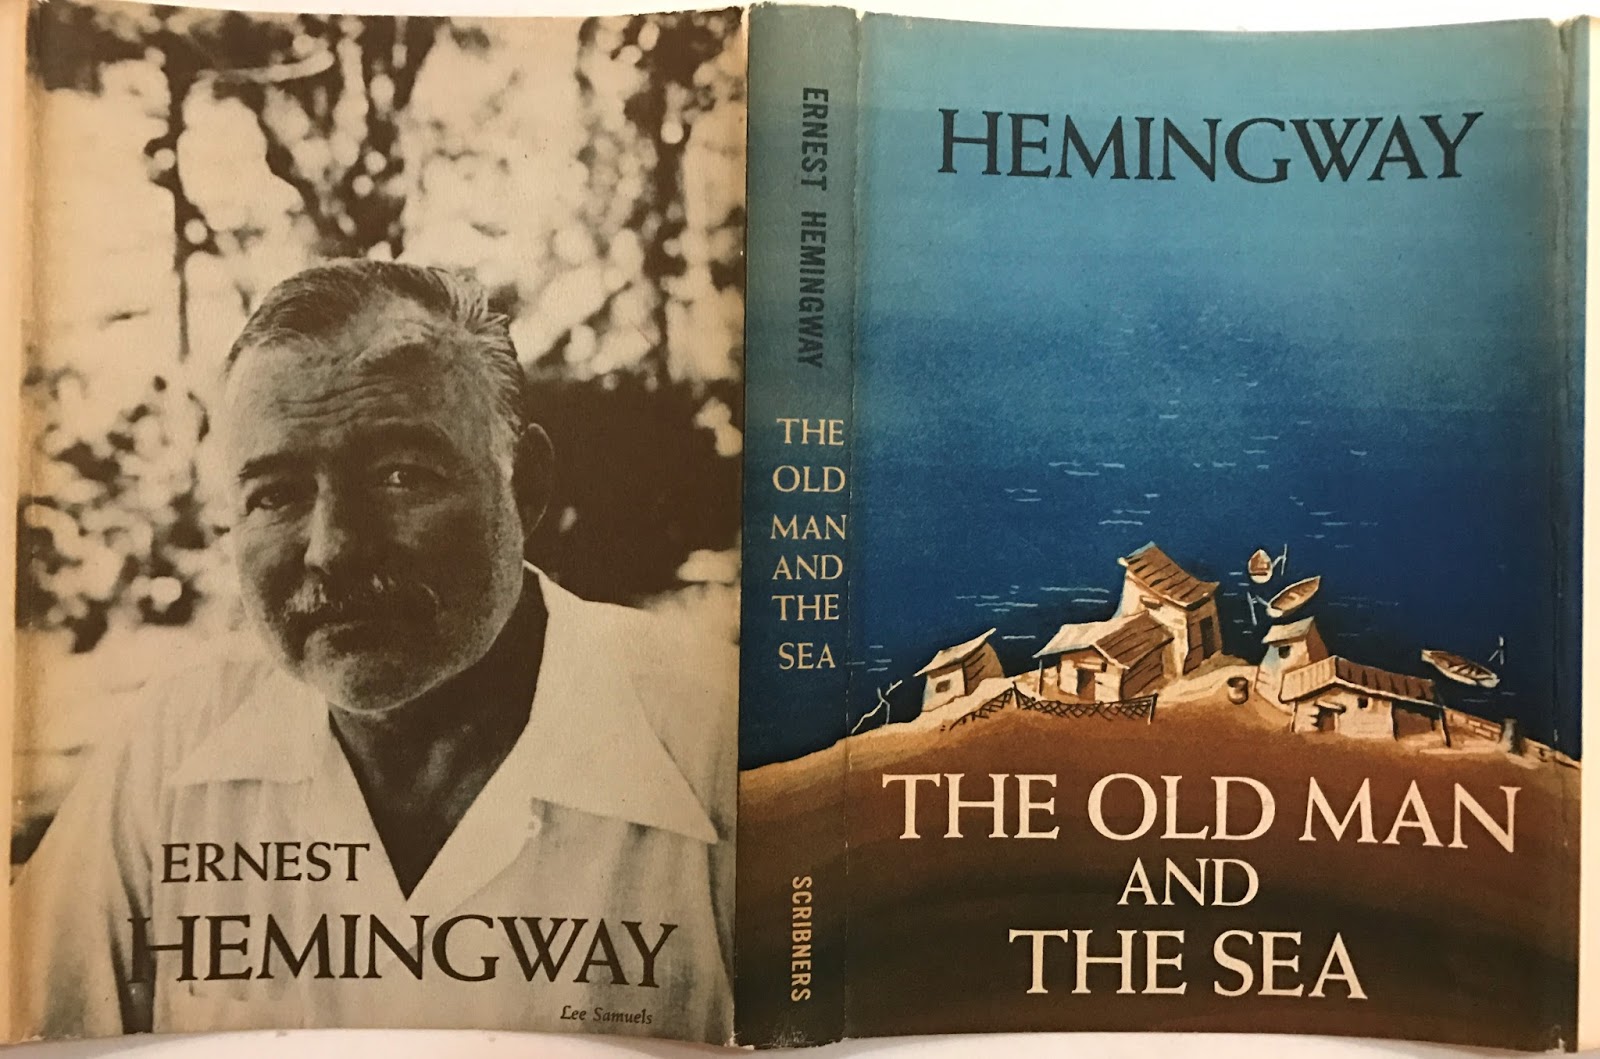 The Old Man And The Sea Bookporn Club